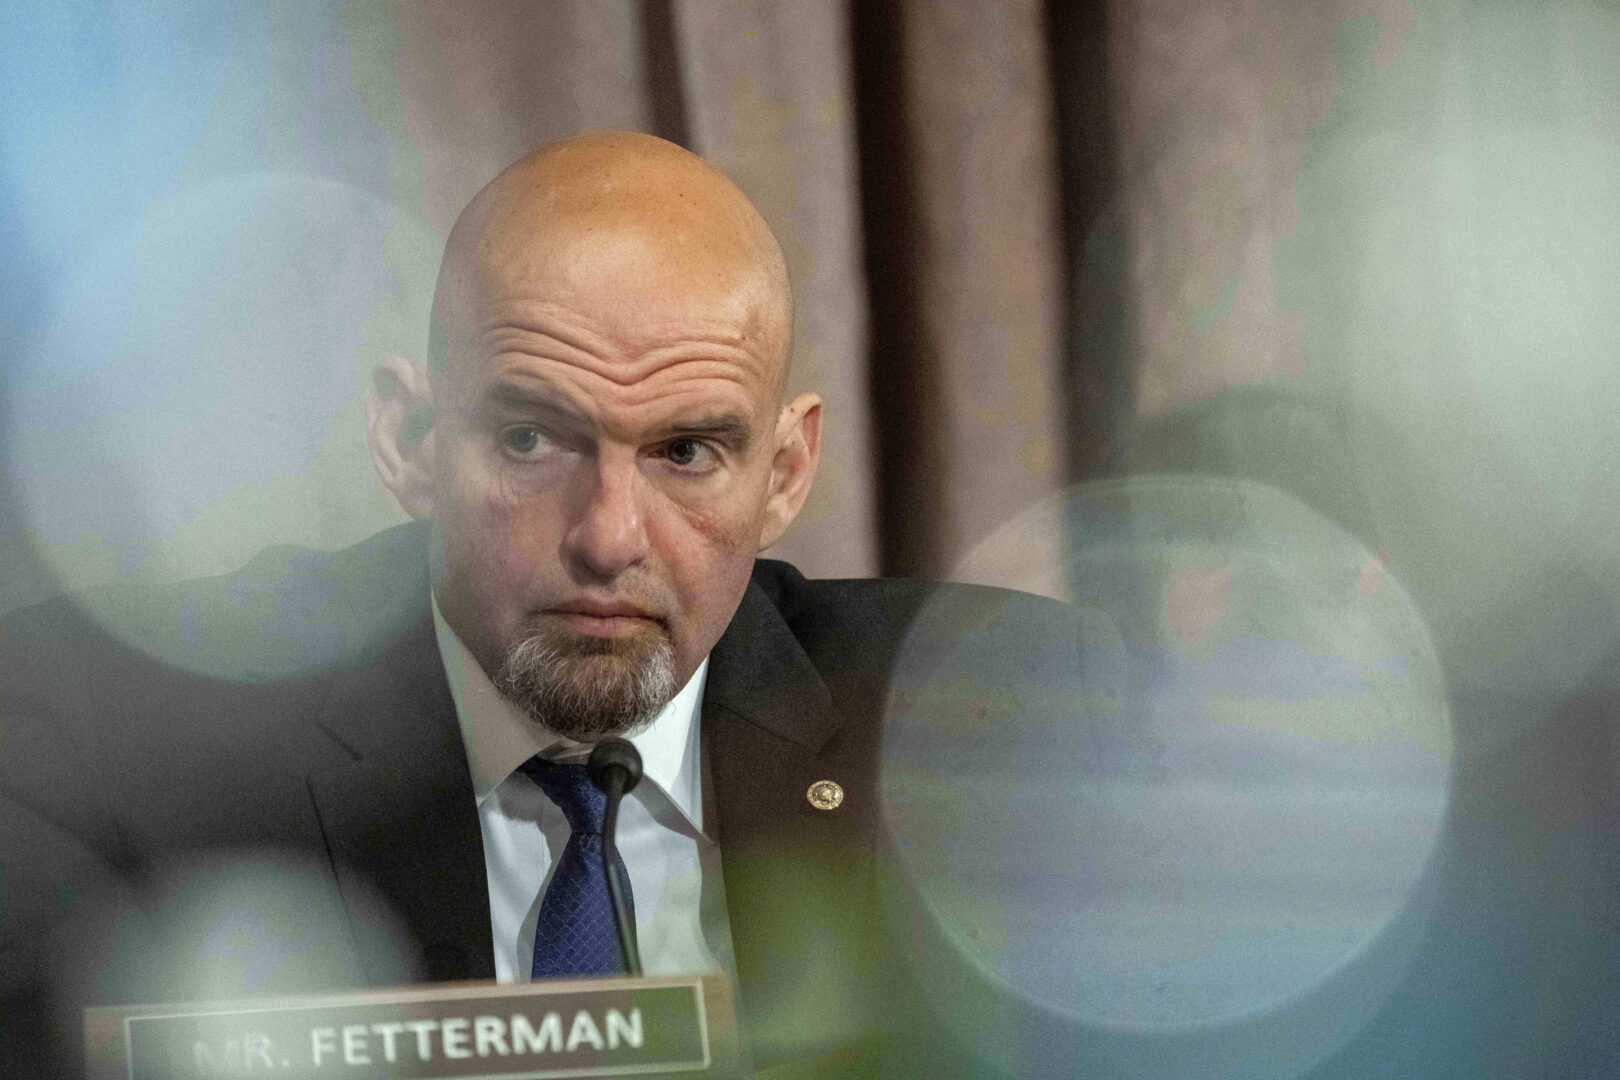 FILE - Sen. John Fetterman, D-Pa., listens during a confirmation hearing of Jared Bernstein to be the chair of the White House Council of Economic Advisers, on Capitol Hill, Tuesday, April 18, 2023, in Washington. The first-term Pennsylvania Democrat held a deeply personal and introspective interview with NBC’s “Meet the Press” that aired Sunday, Dec. 31. (AP Photo/Alex Brandon, File)